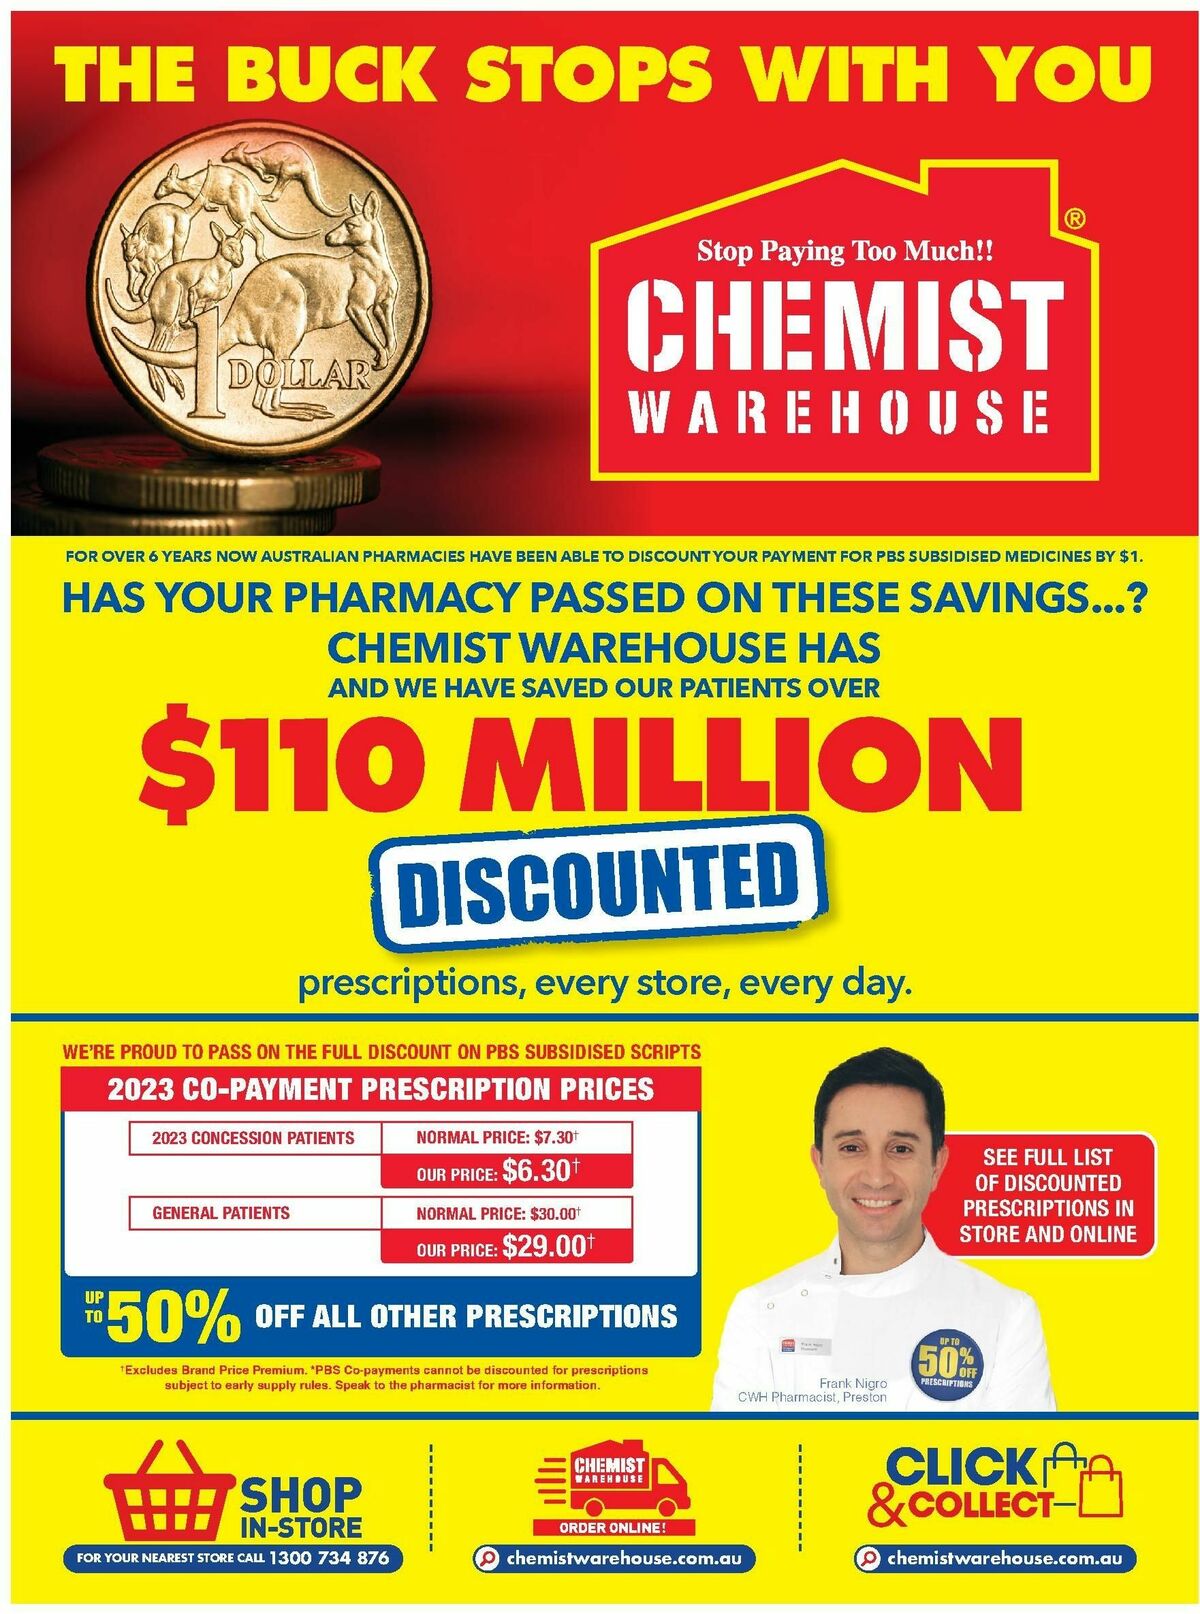 Chemist Warehouse Discounted! Prescriptions Catalogues from 22 November